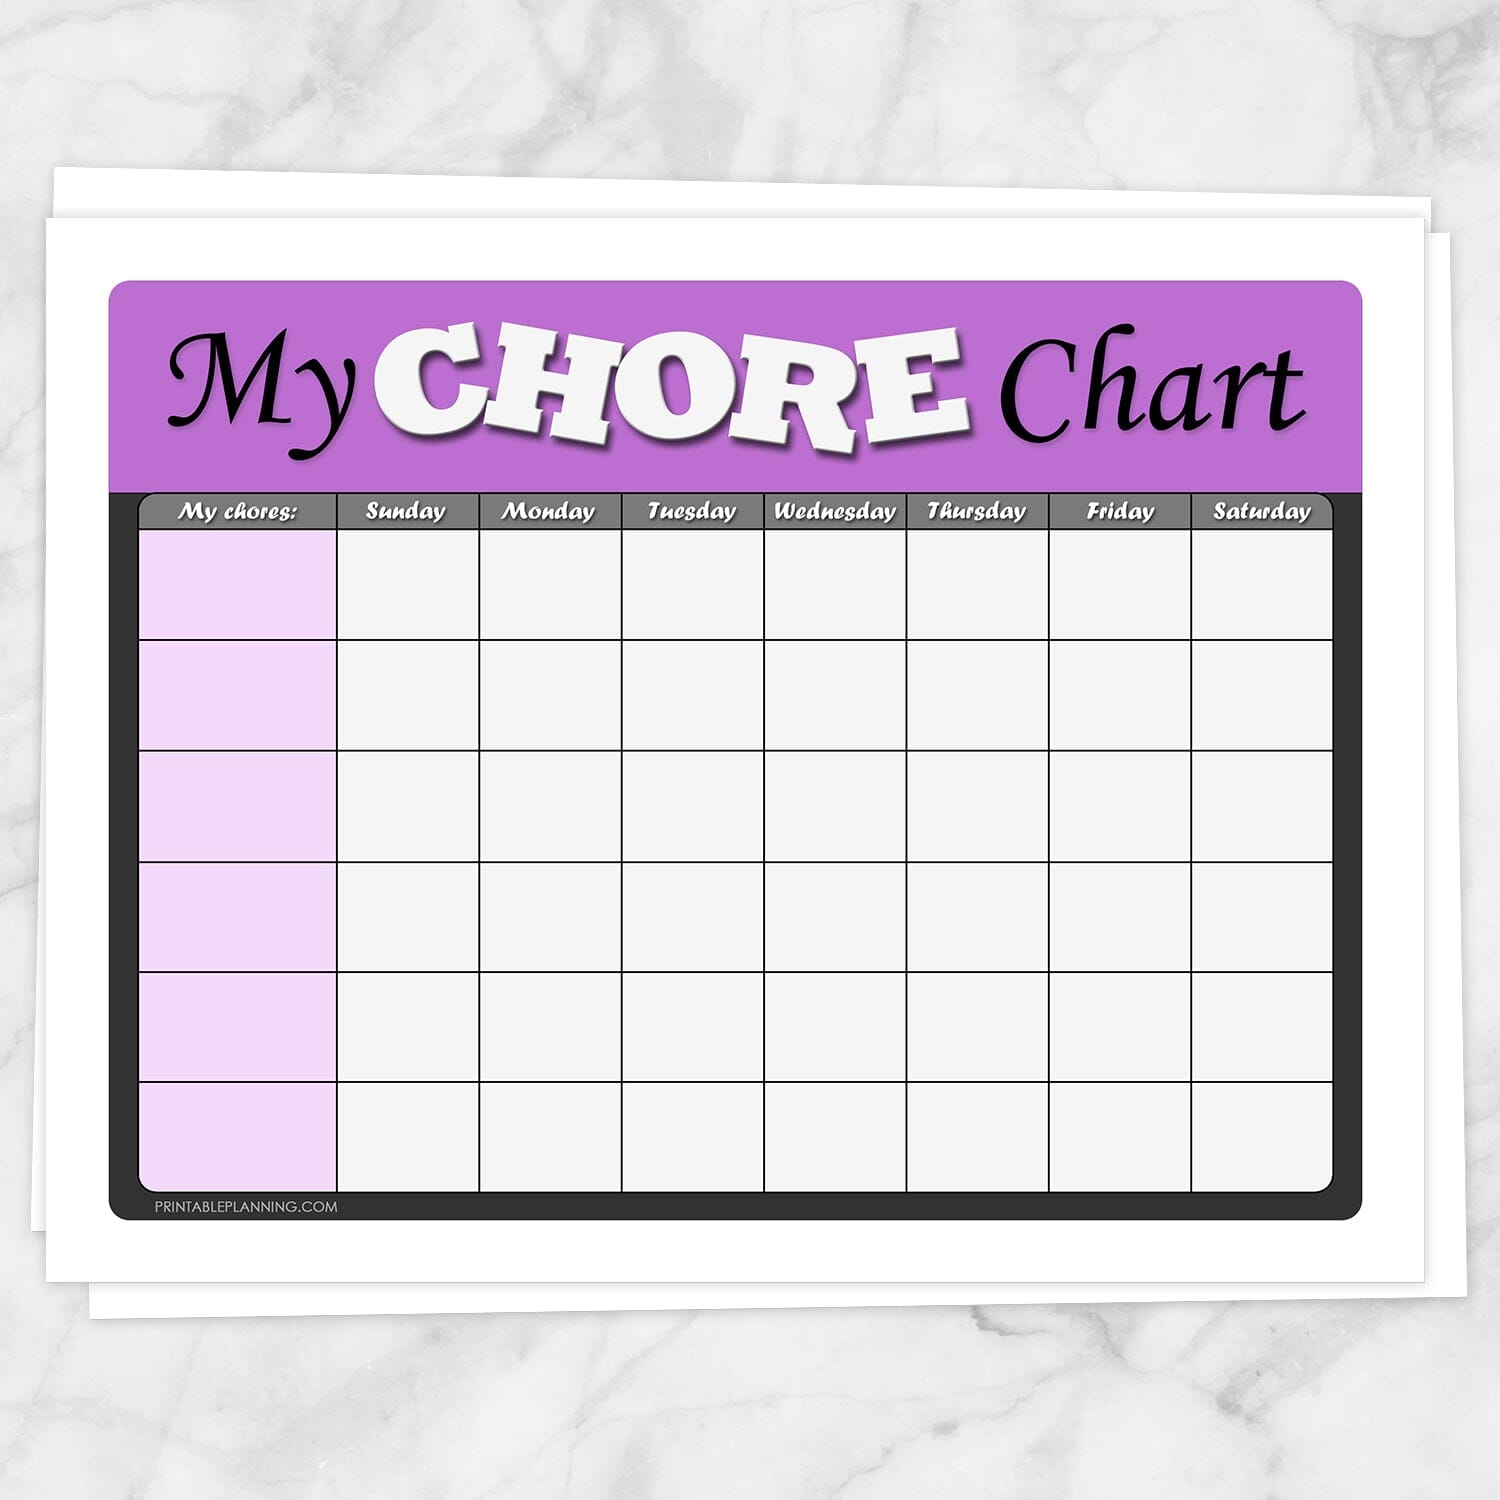 Printable Kids Chore Chart - 'My Chore Chart' Weekly Page in purple at Printable Planning.